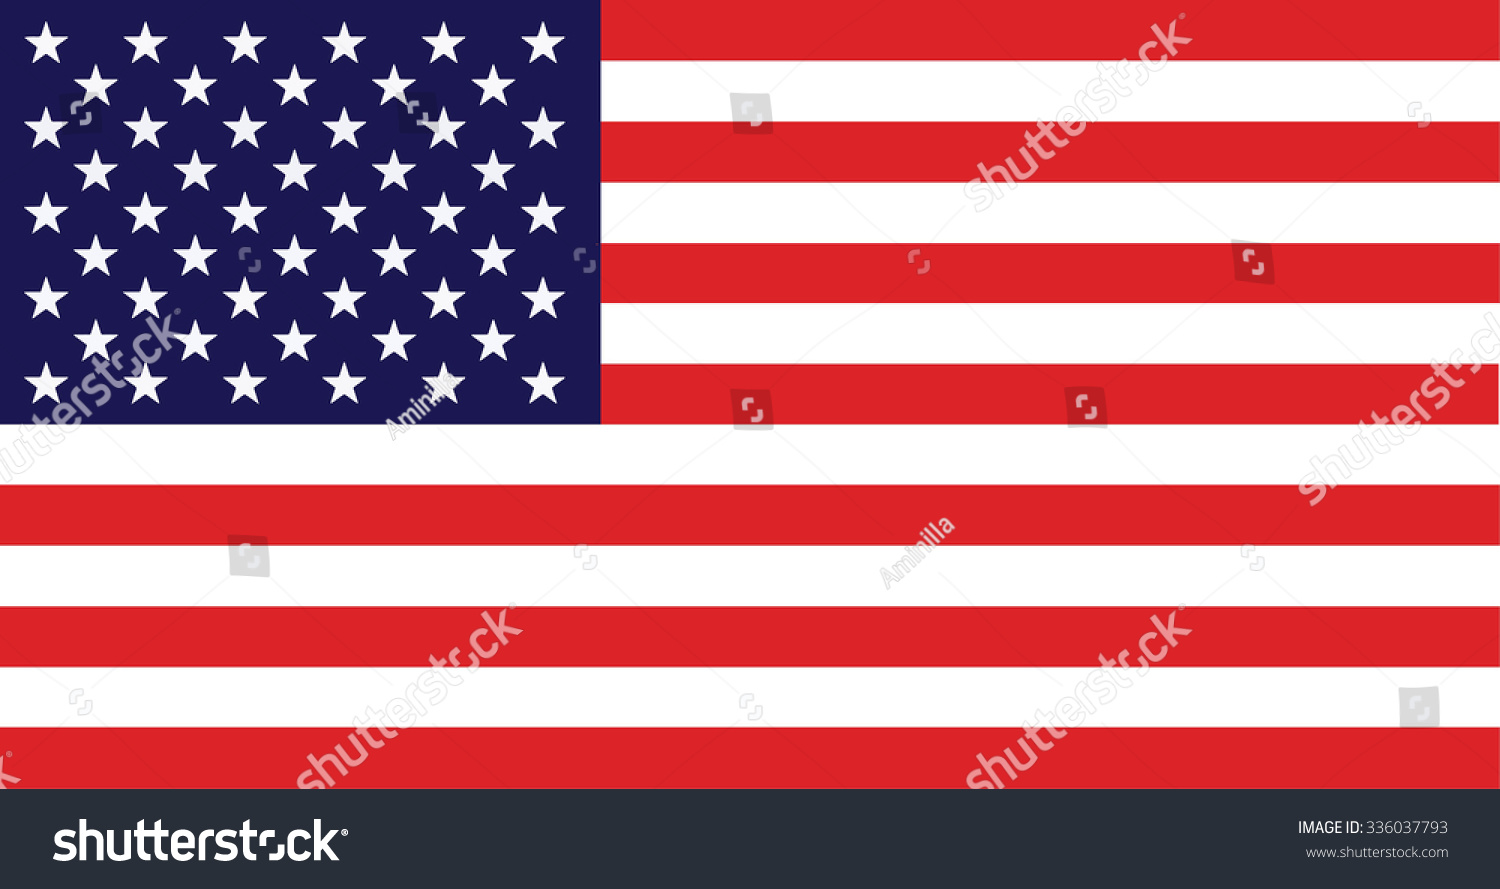 vector image of american flag #336037793